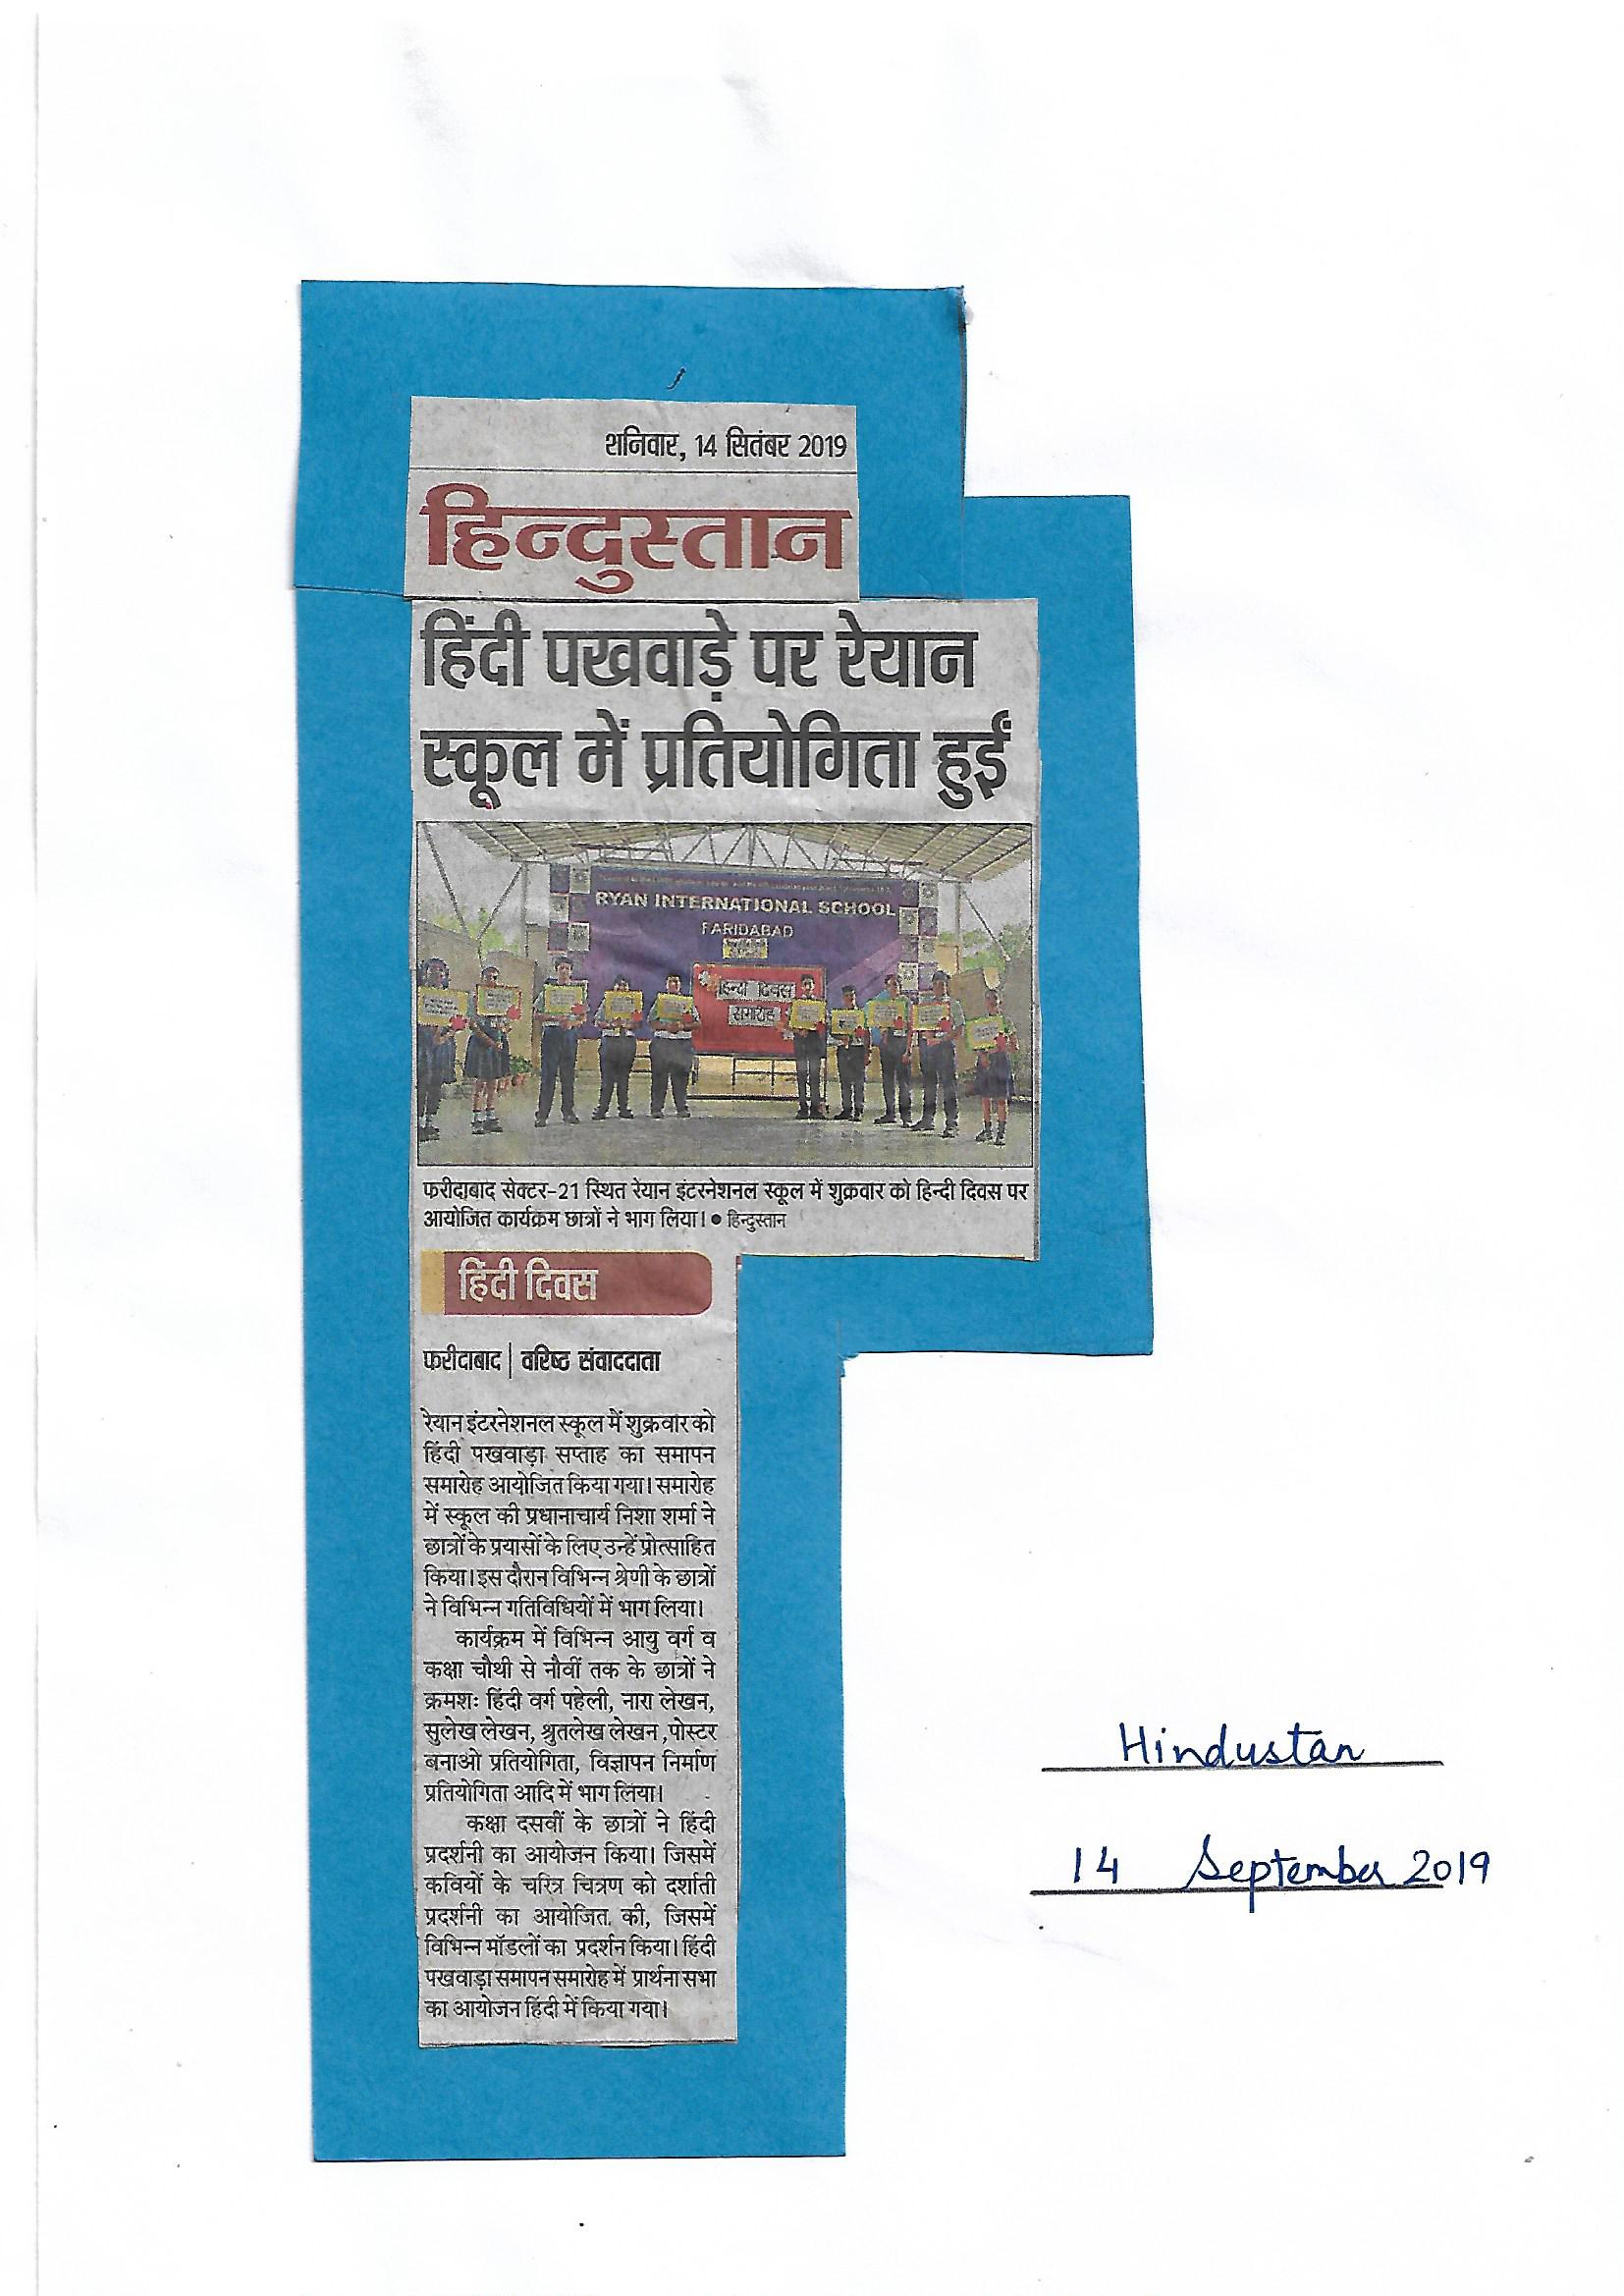 Ryan International School Faridabad organises a competition in the school on the occasion of Hindi Day